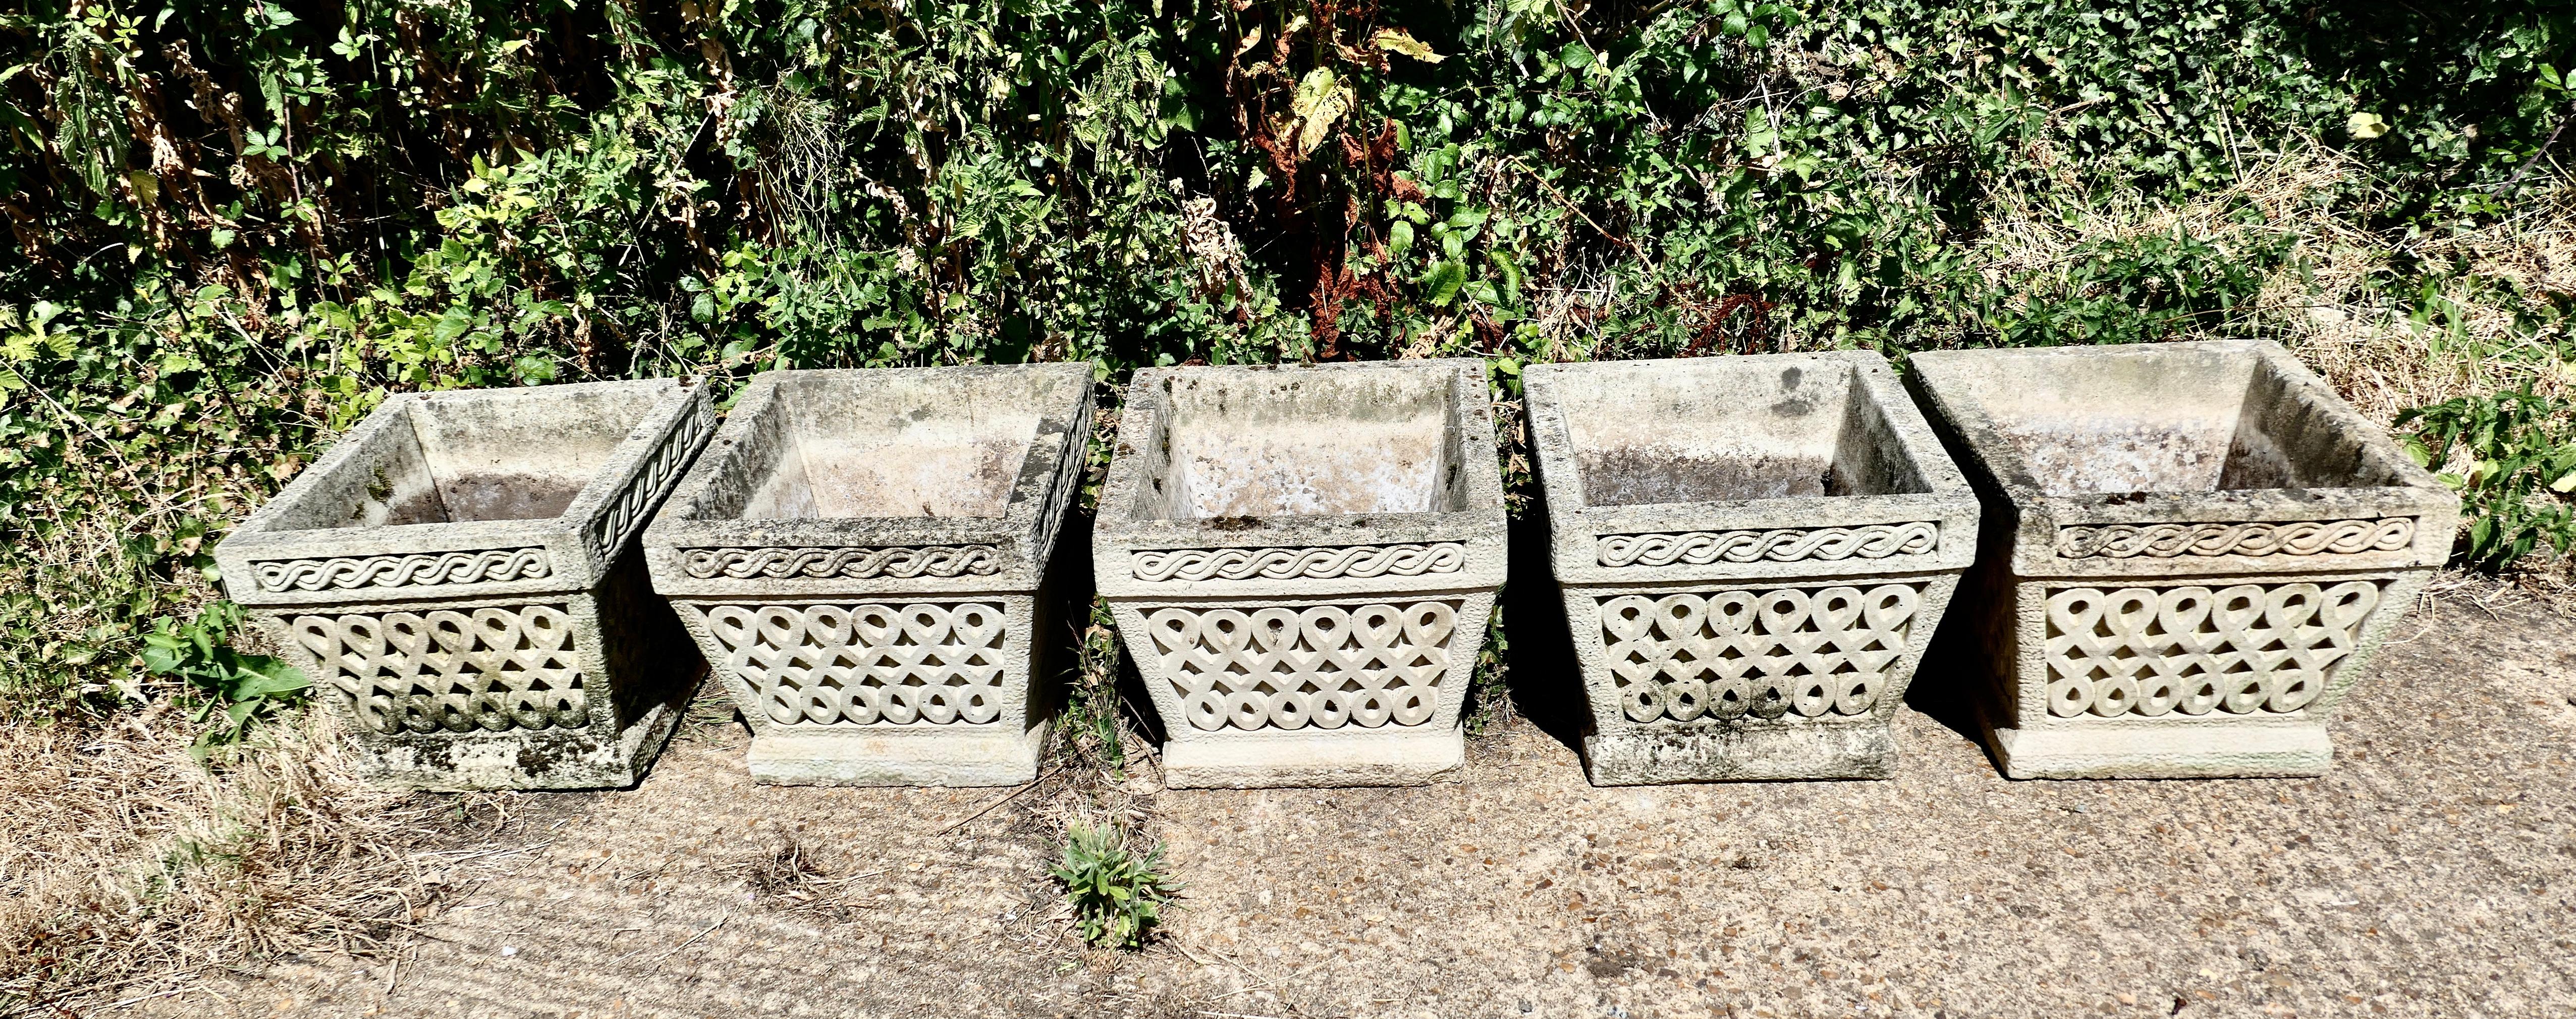 Set of 6 Classical Basket Weave Garden Planters For Sale 9